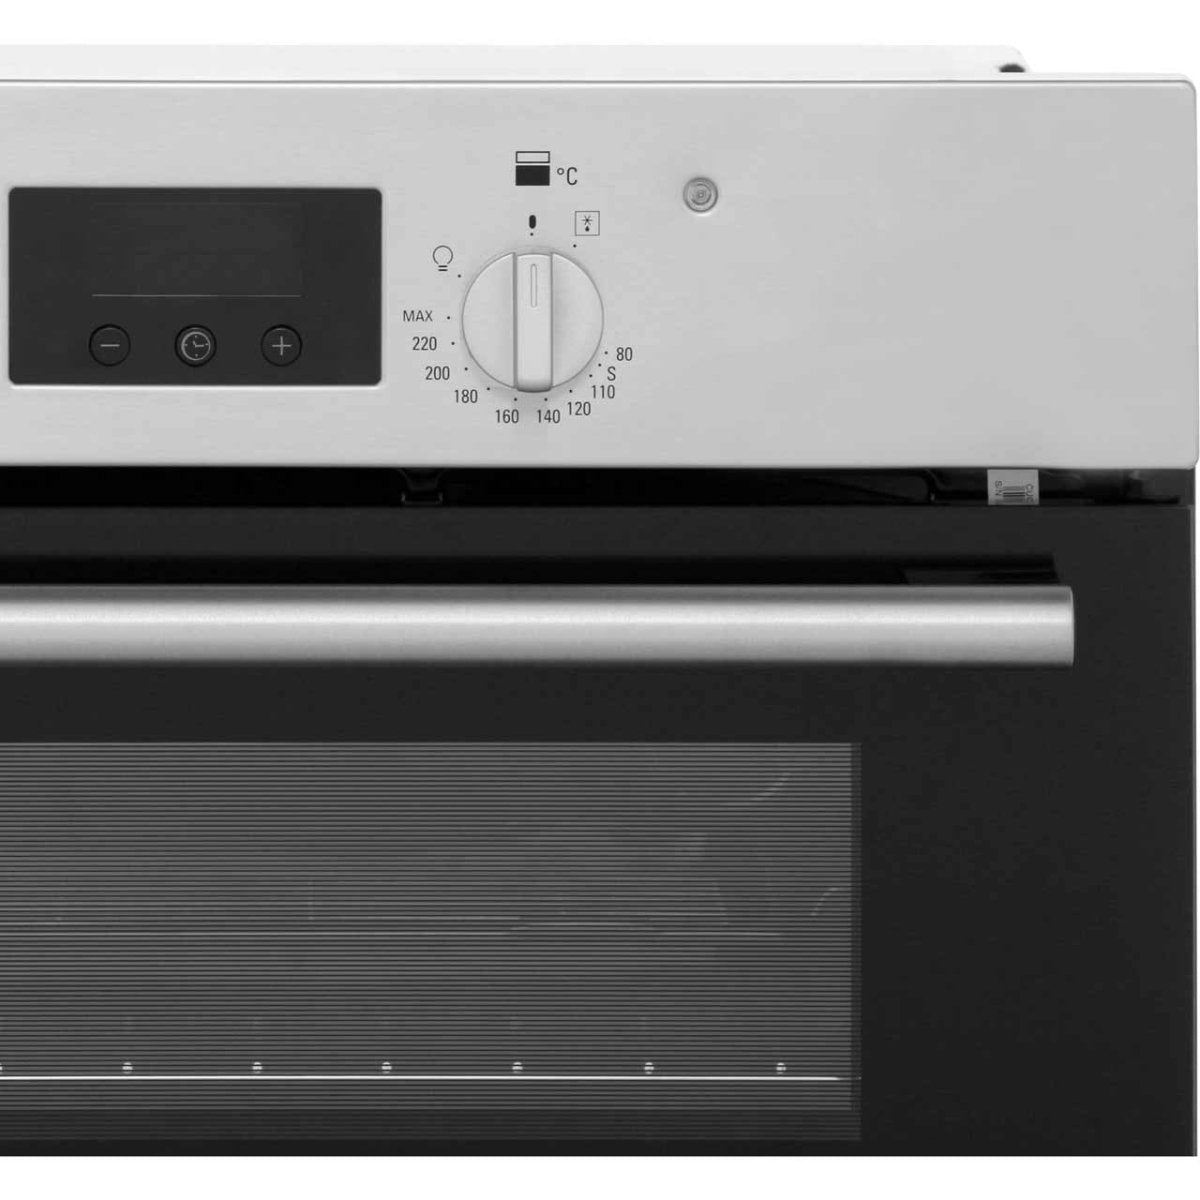 Hotpoint Class 2 DD2540BL Built In Electric Double Oven - Black - A/A Rated | Atlantic Electrics